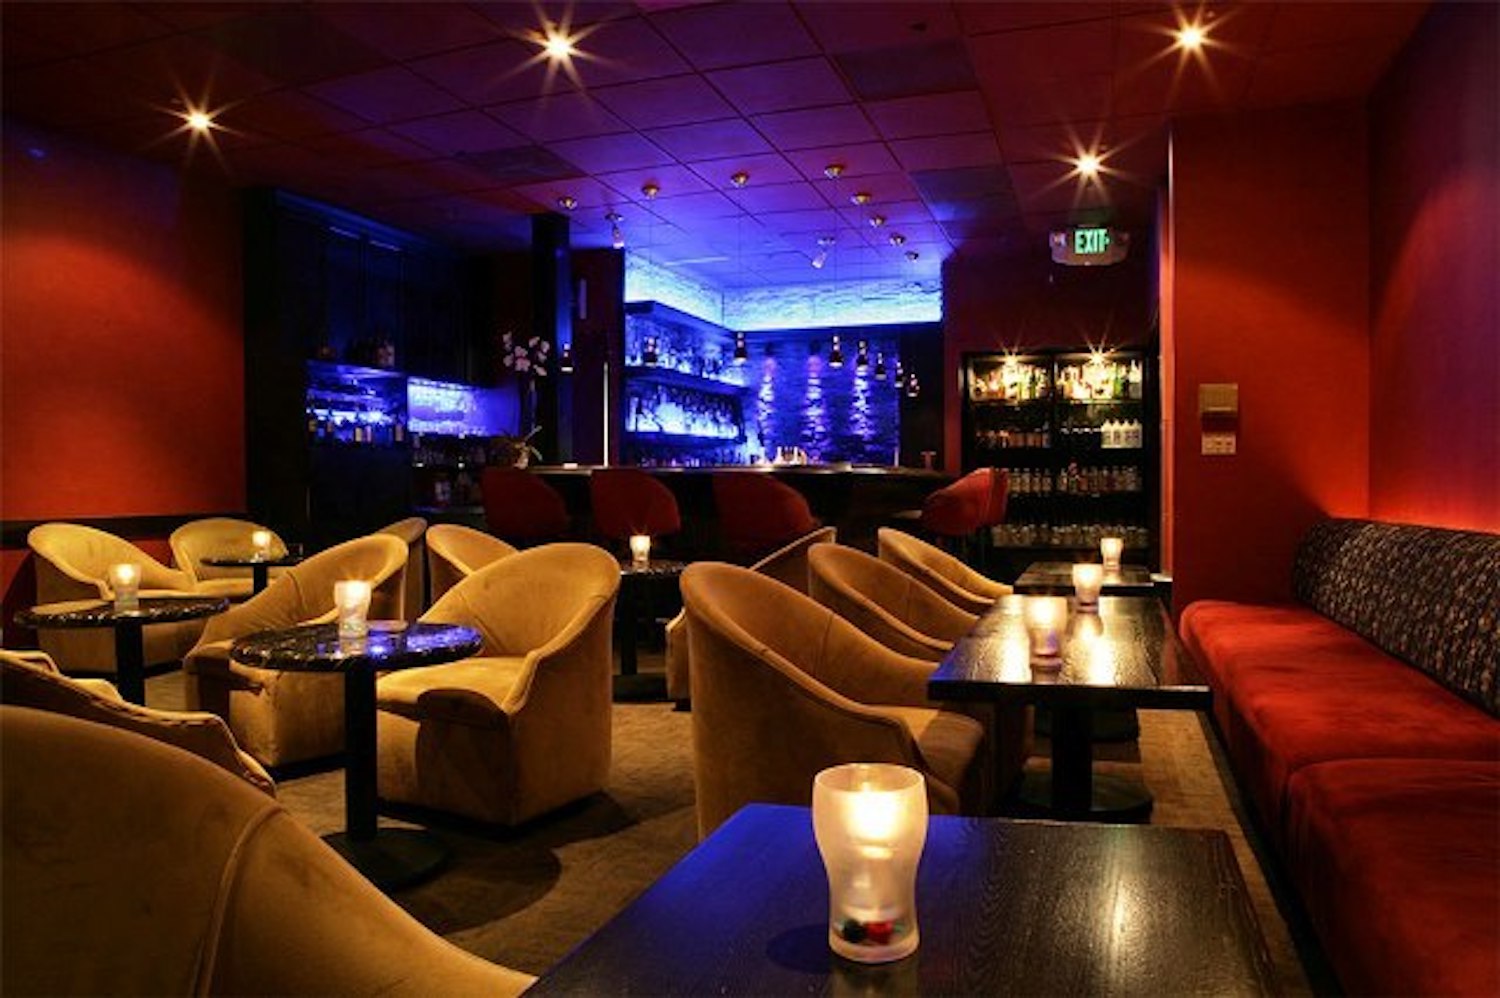 Dark bar area with candles and lounge chairs